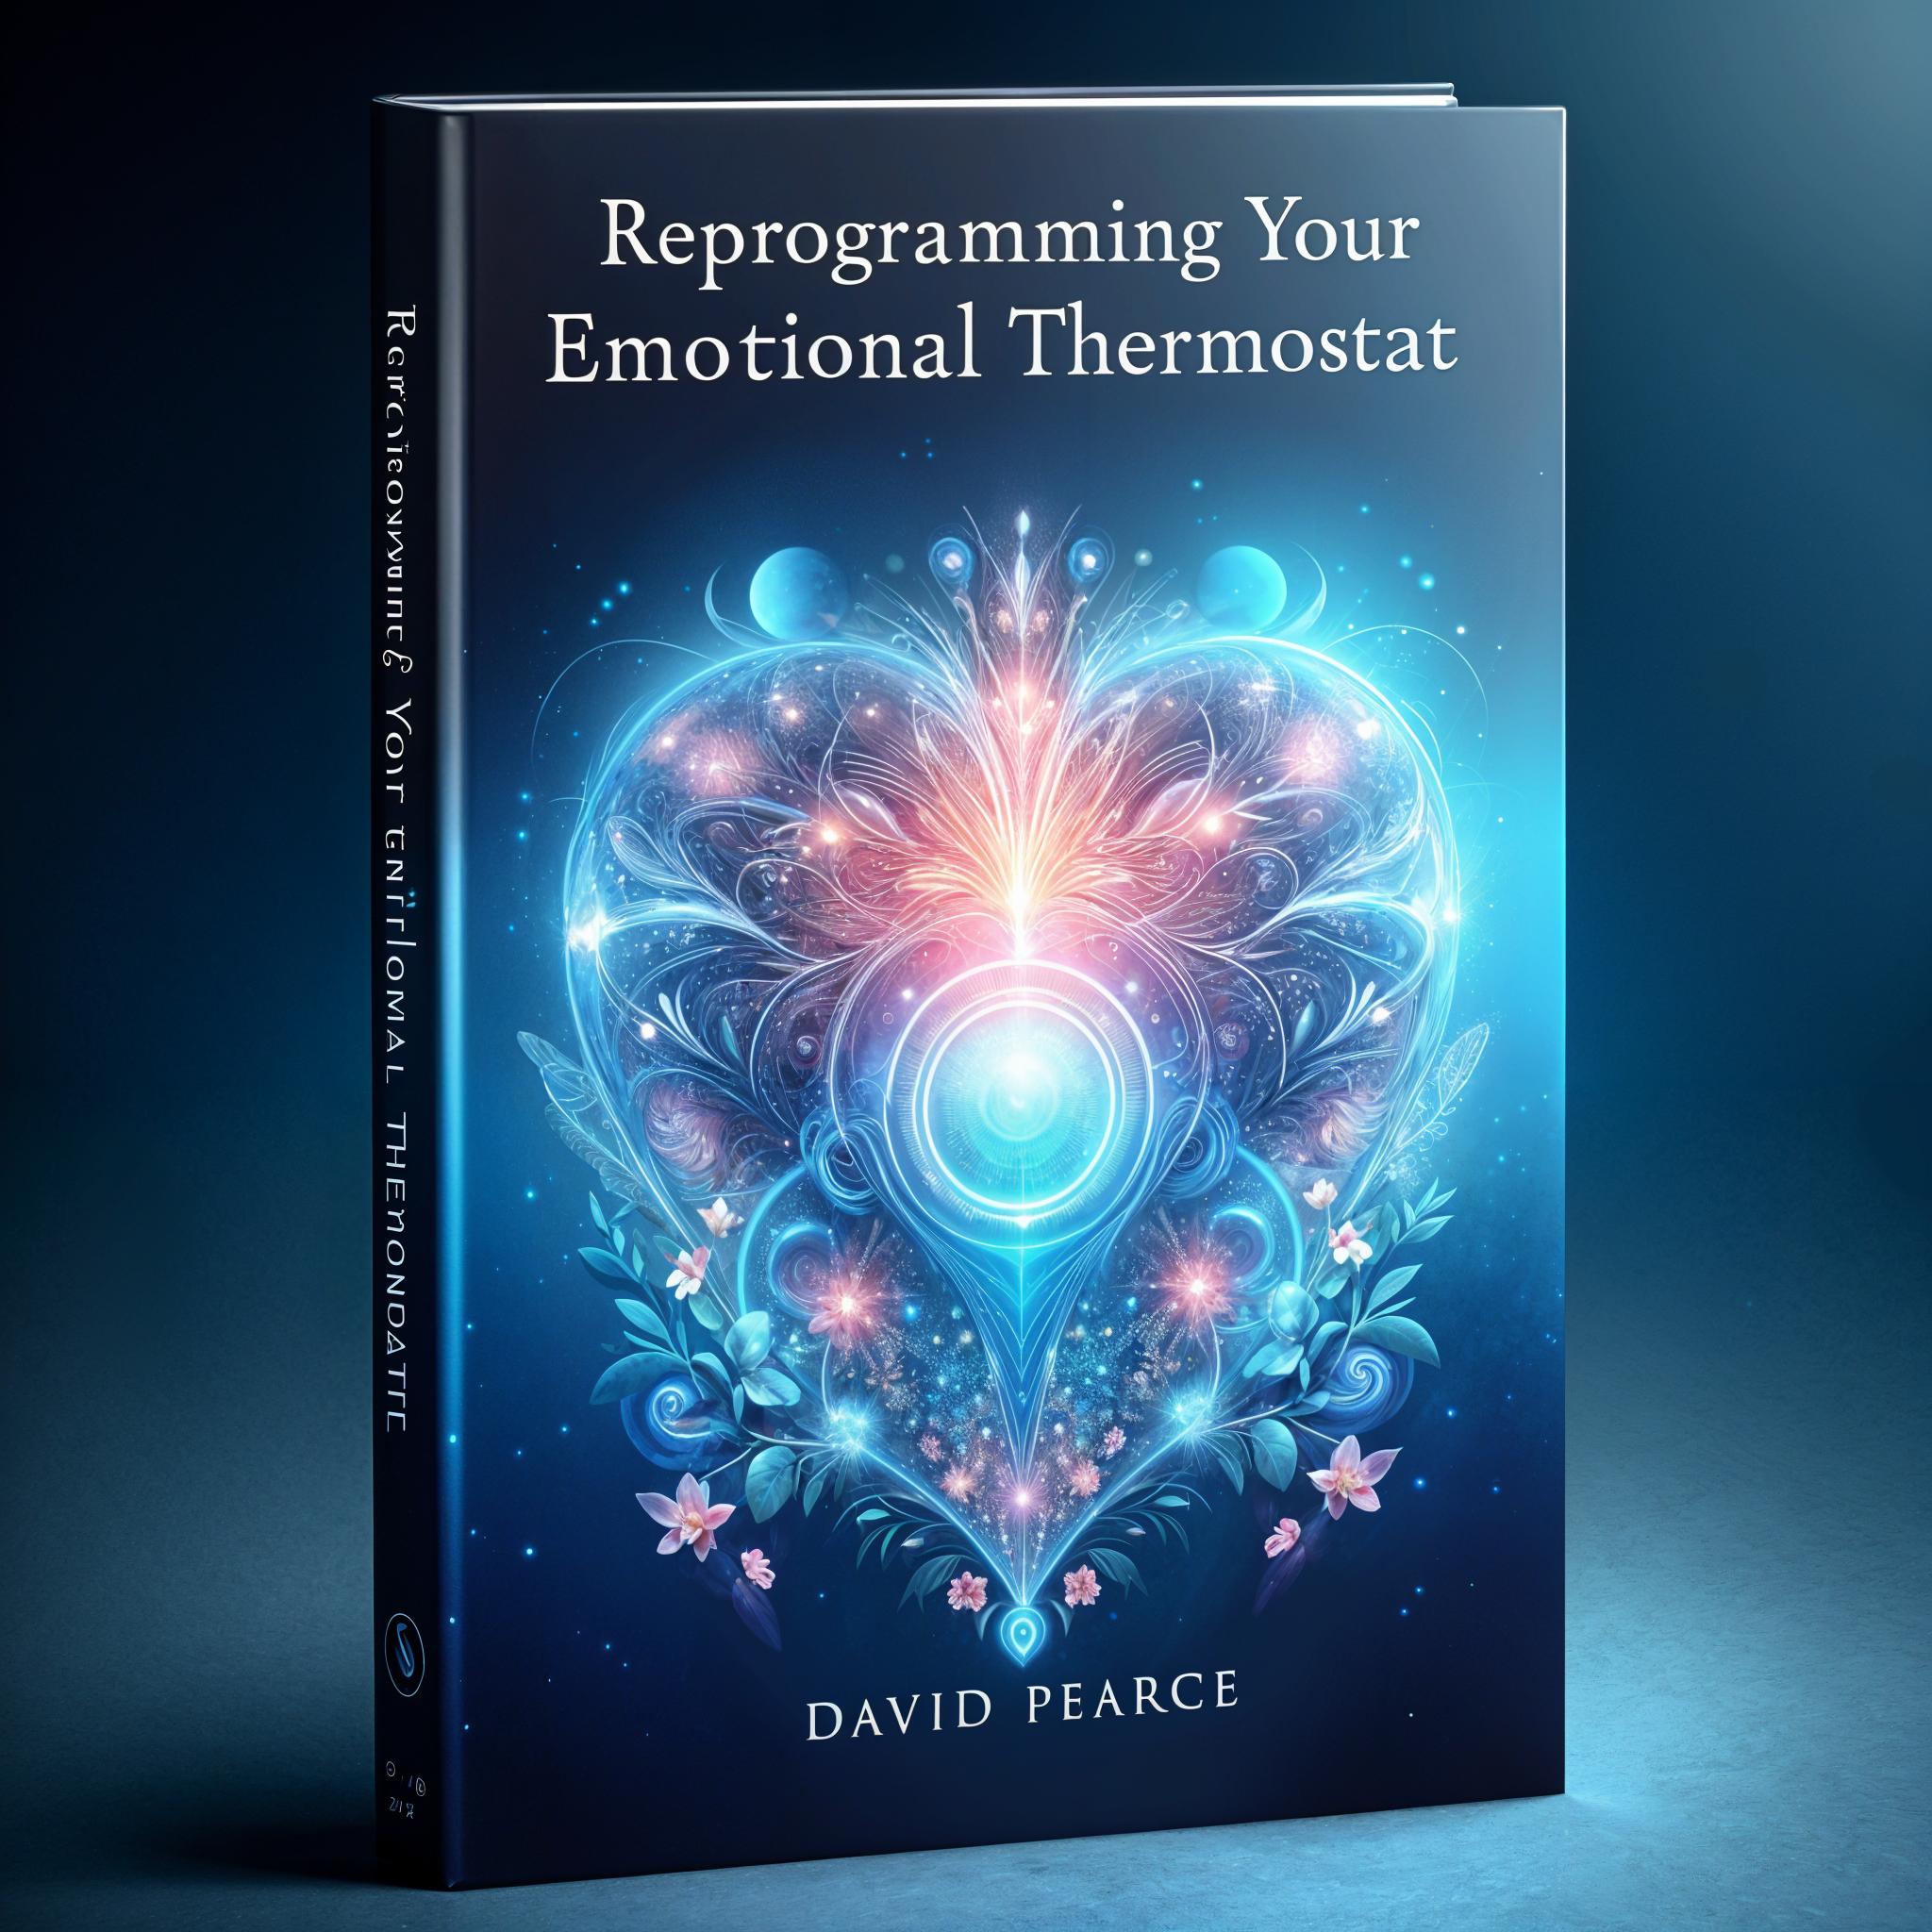 Reprogramming Your Emotional Thermostat by David Pearce